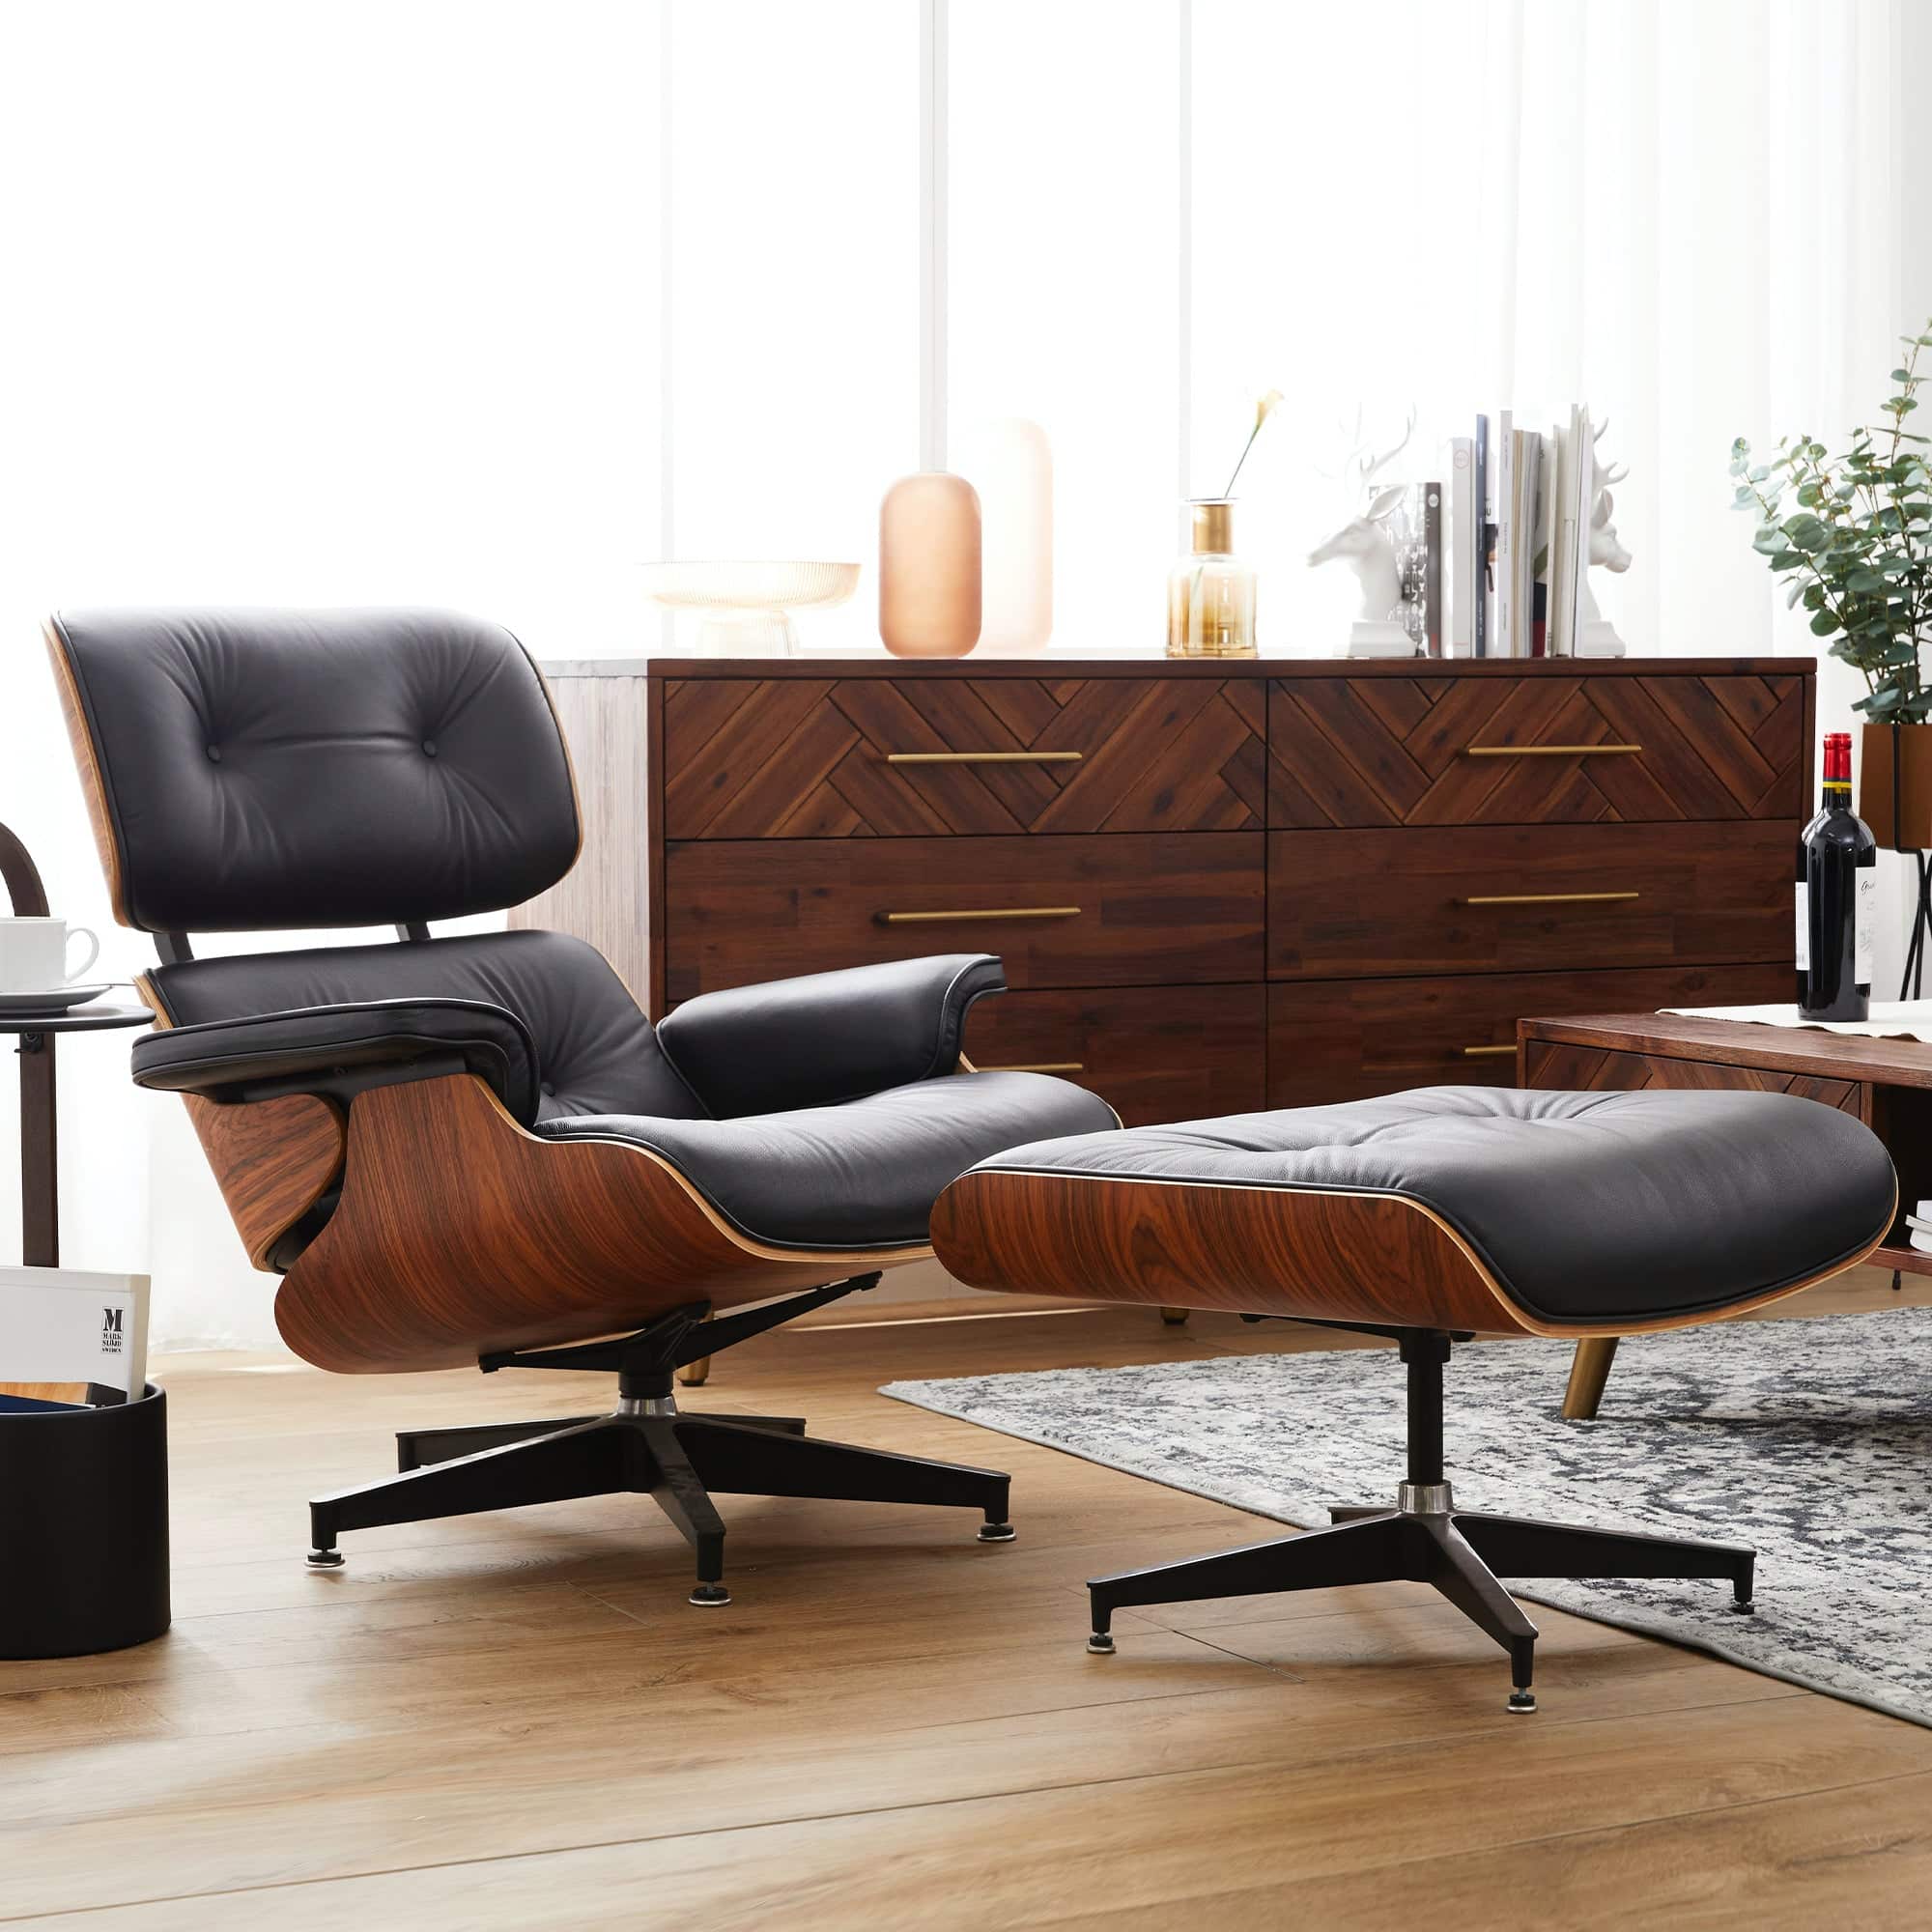 High-quality Eames Lounge Chair and Ottoman Replica with plush leather padding, reflecting impeccable mid-century modern design.